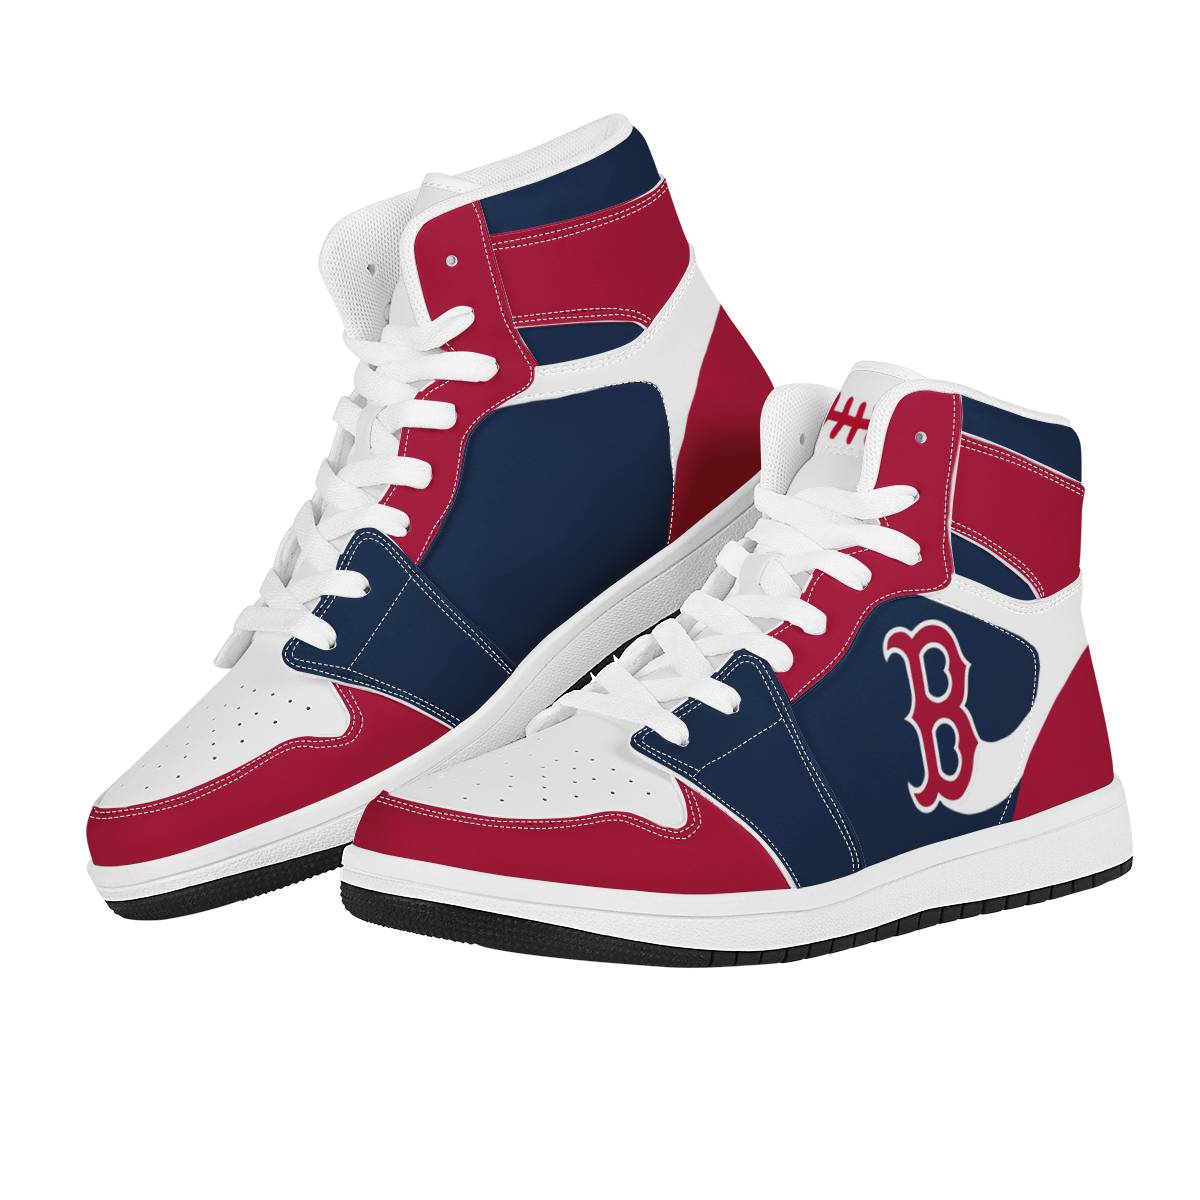 Women's Boston Red Sox High Top Leather AJ1 Sneakers 001